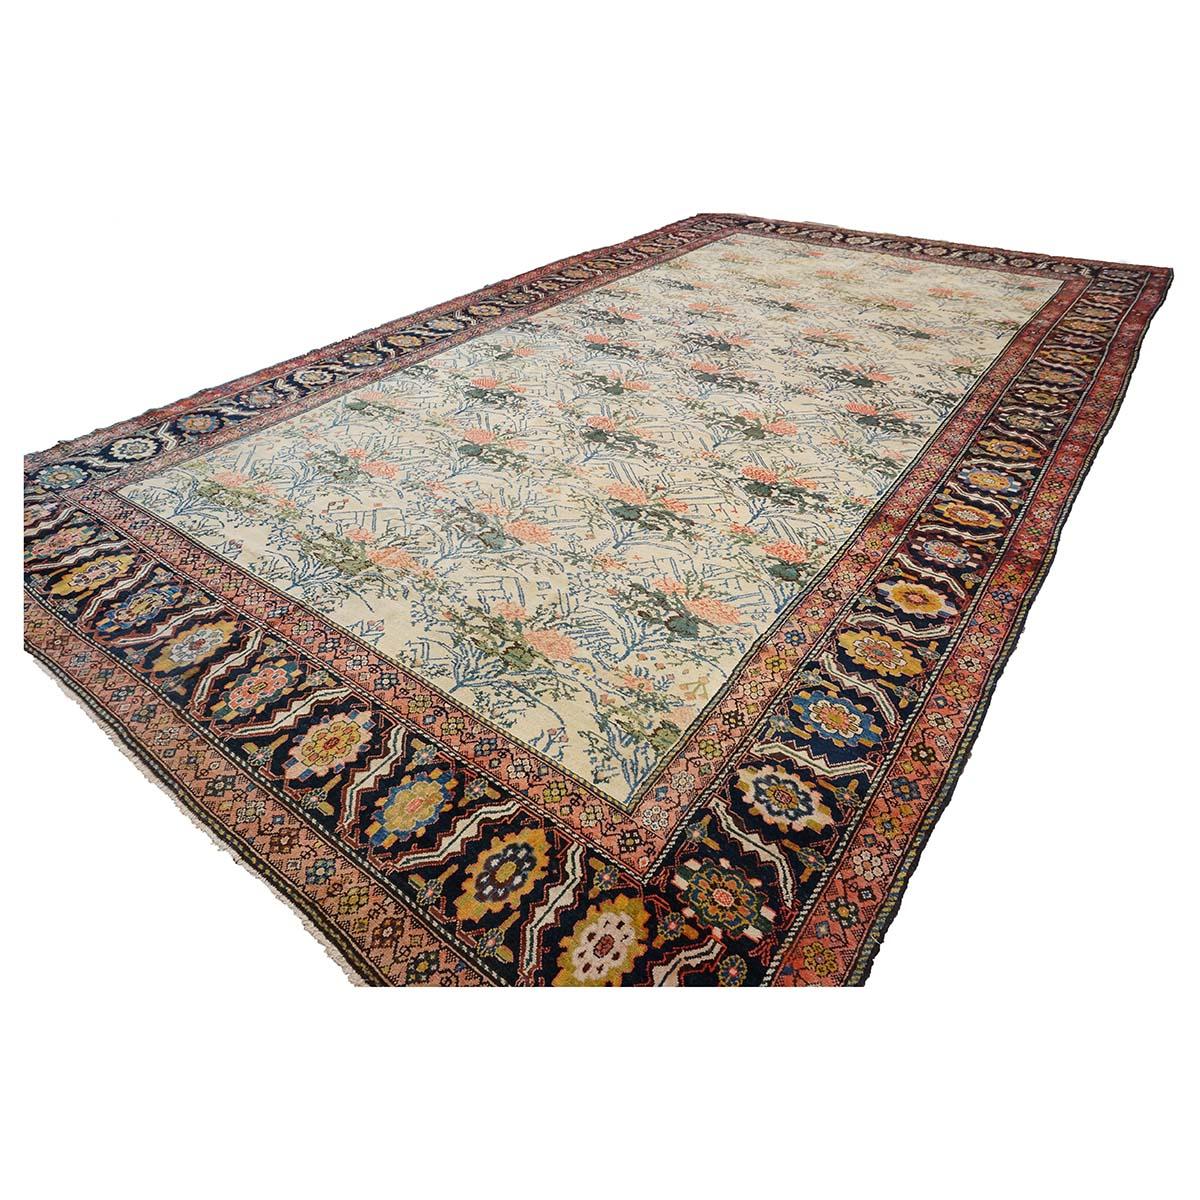 19th Century Large Antique Persian Malayer 11x18 Handwoven Rug For Sale 1